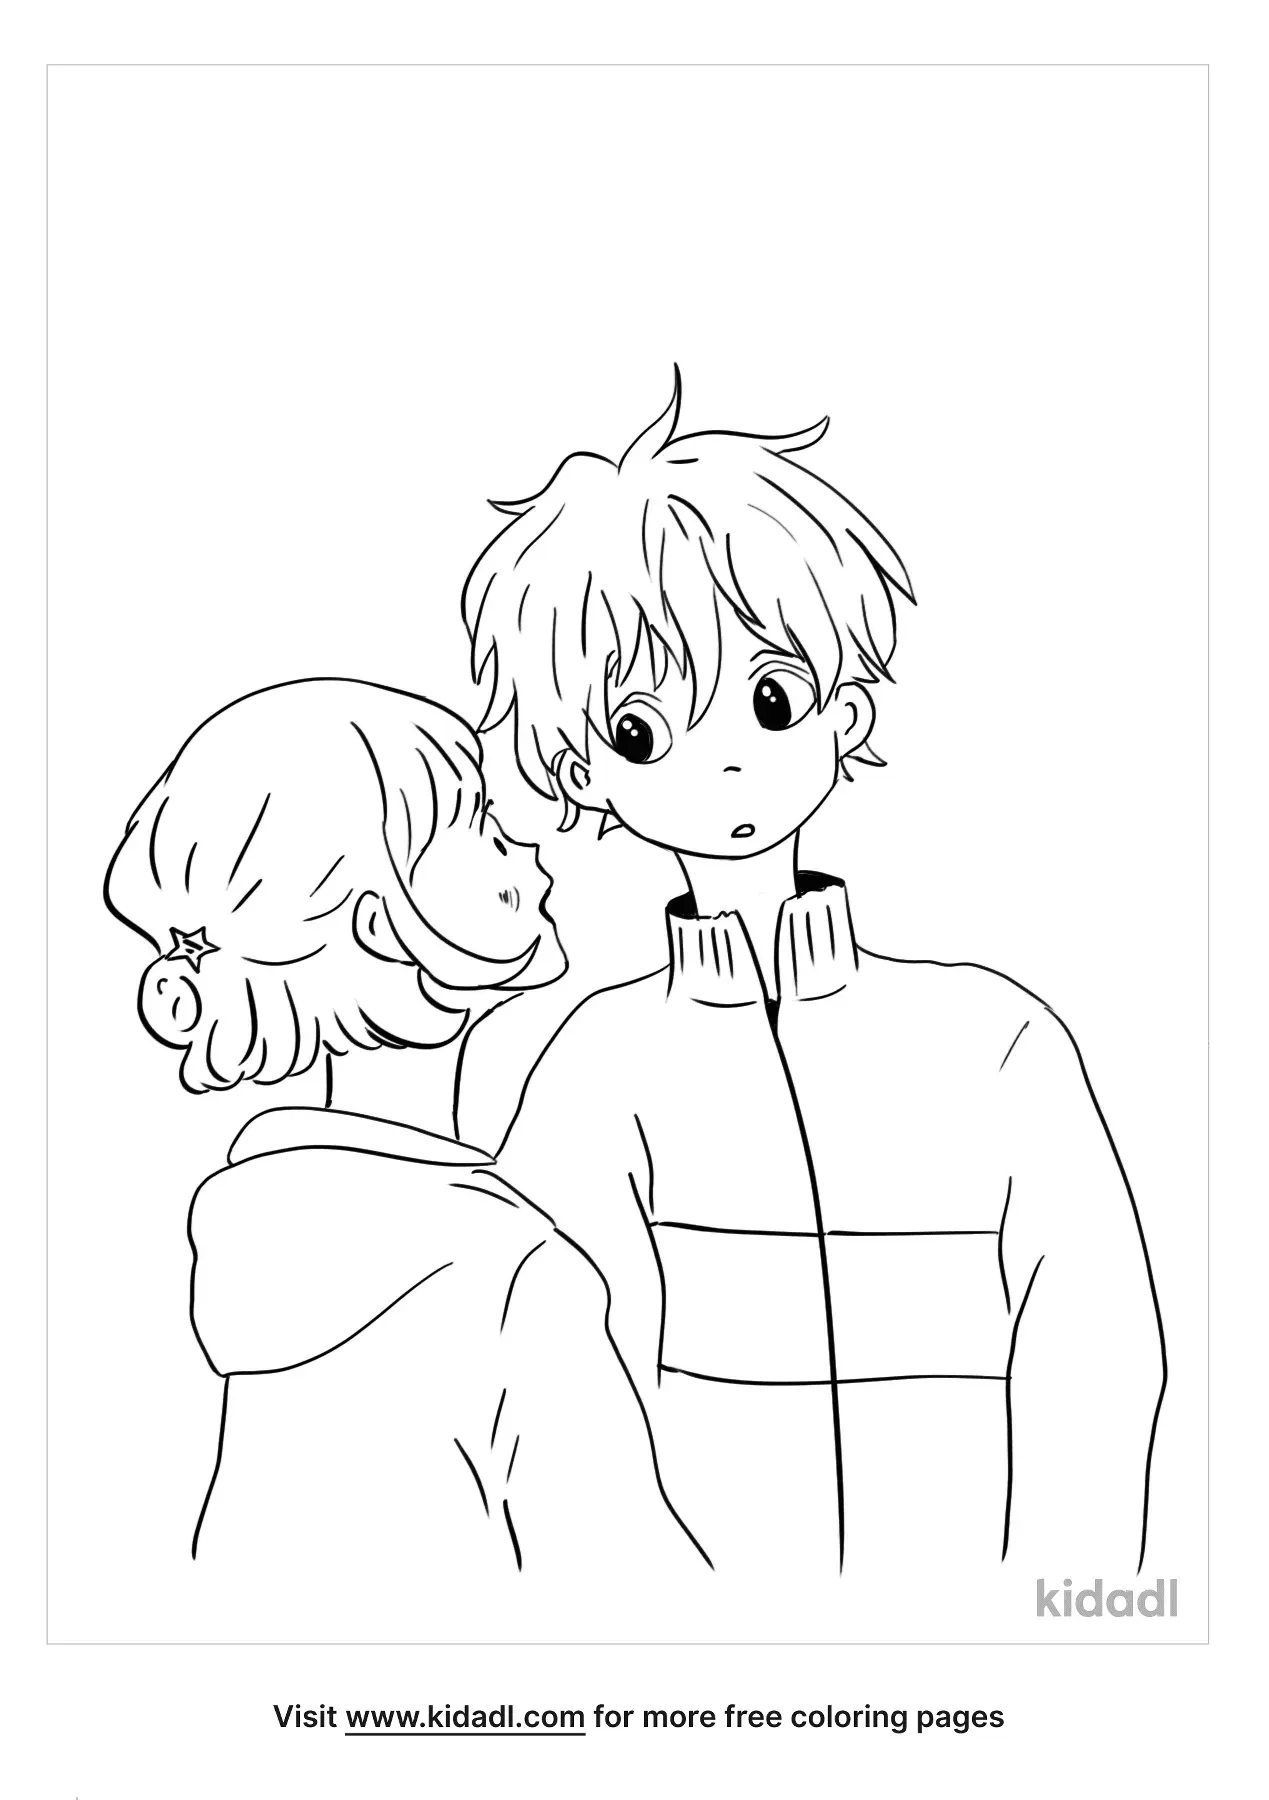 Anime Couple Png Images Transparent Free Download  Cute Shy Anime Couples  PNG Image  Transparent PNG Free Download on SeekPNG